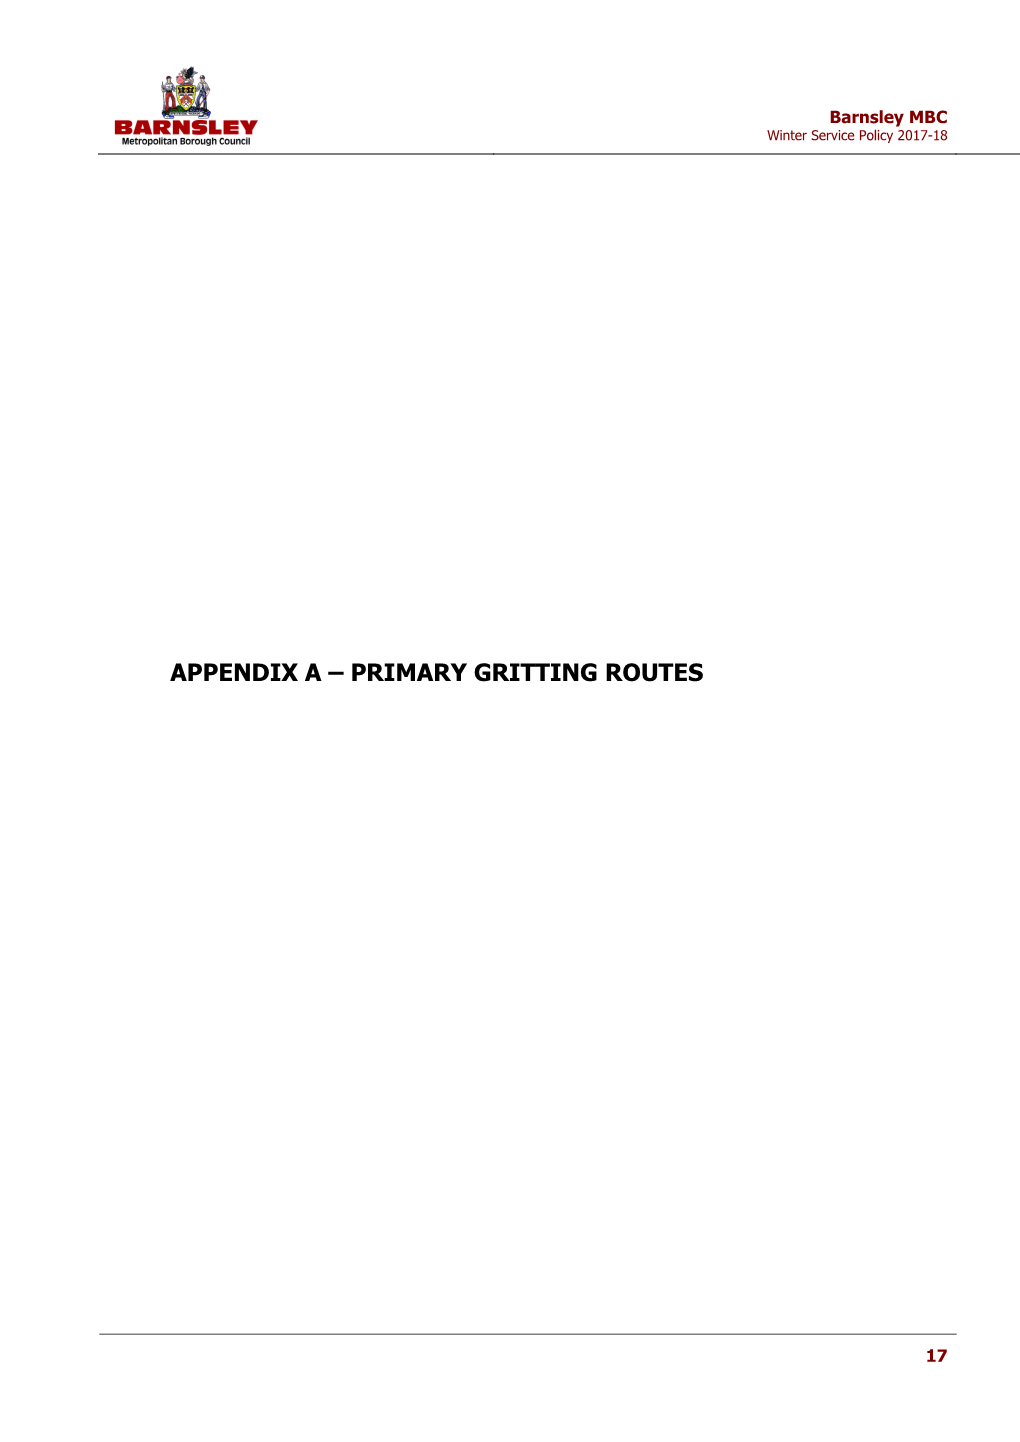 Appendix a – Primary Gritting Routes